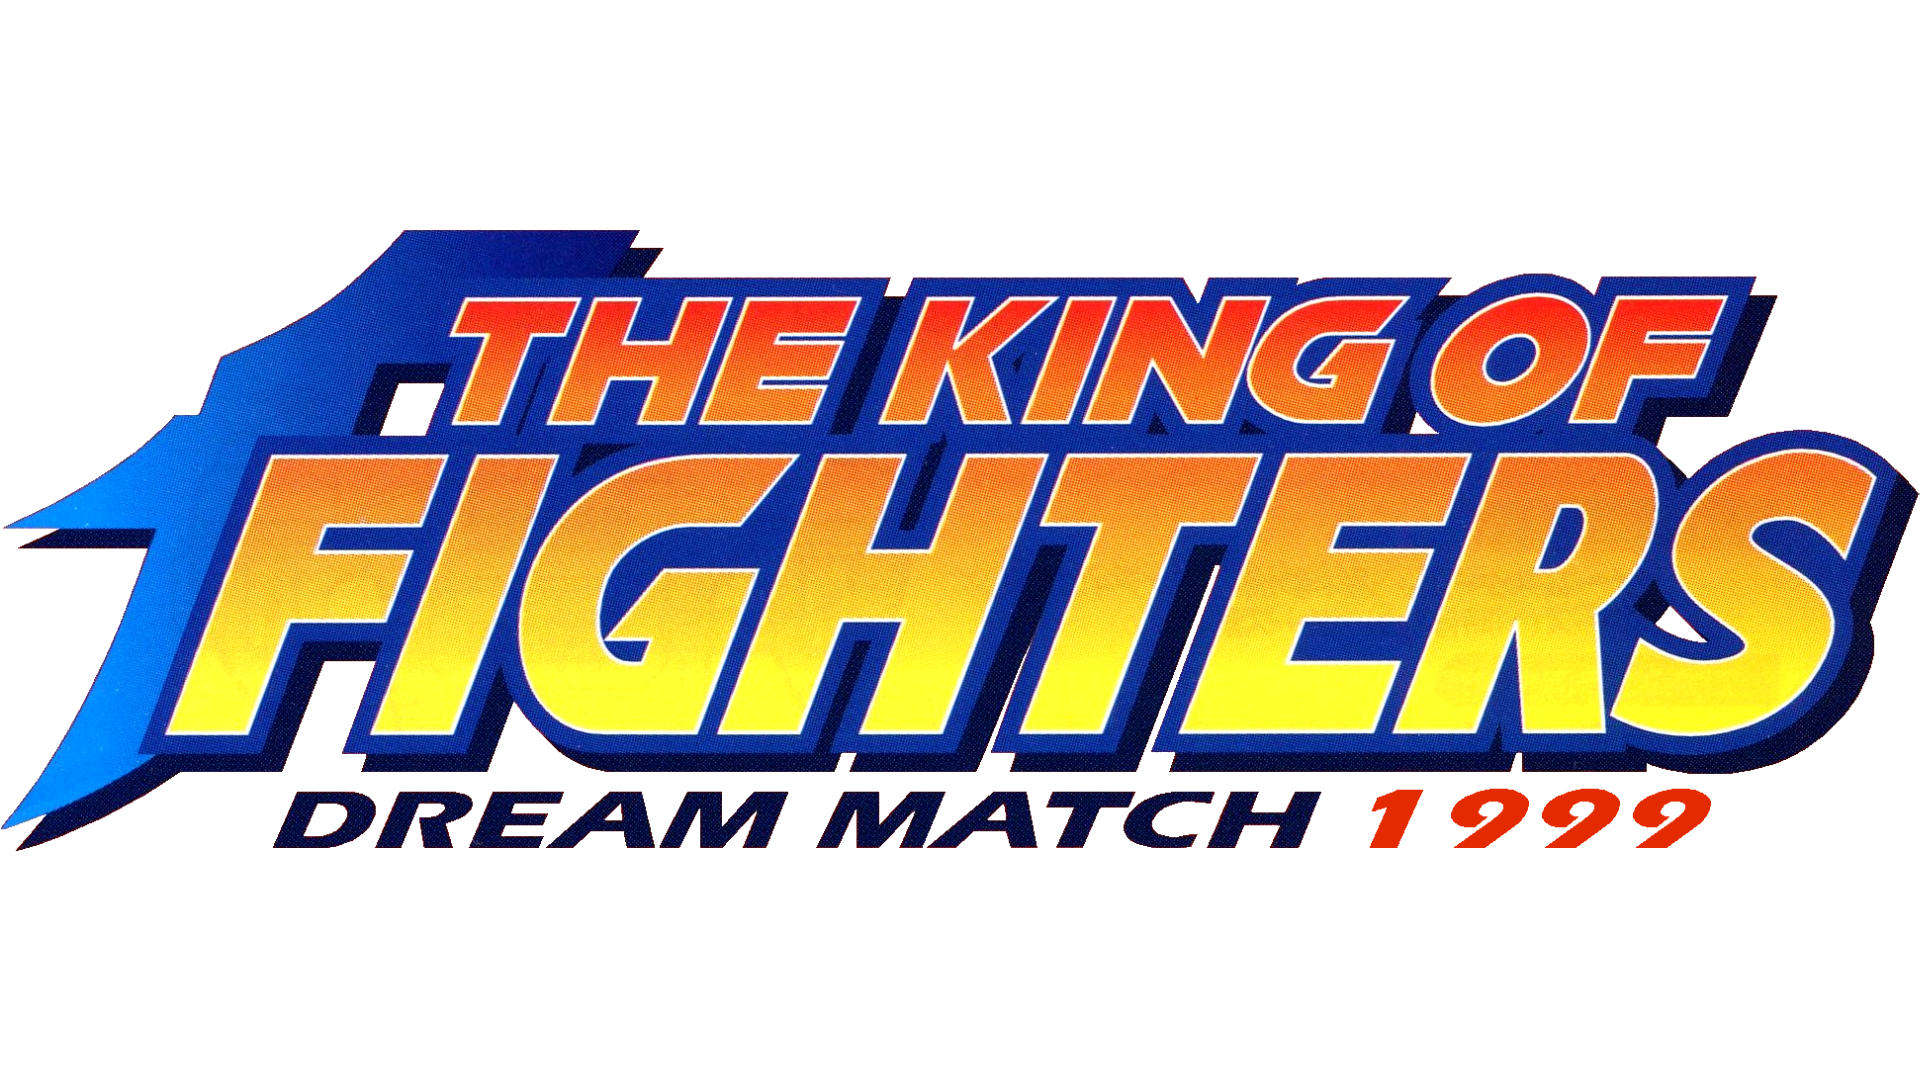 King of Fighters: Dream Match 1999 Logo